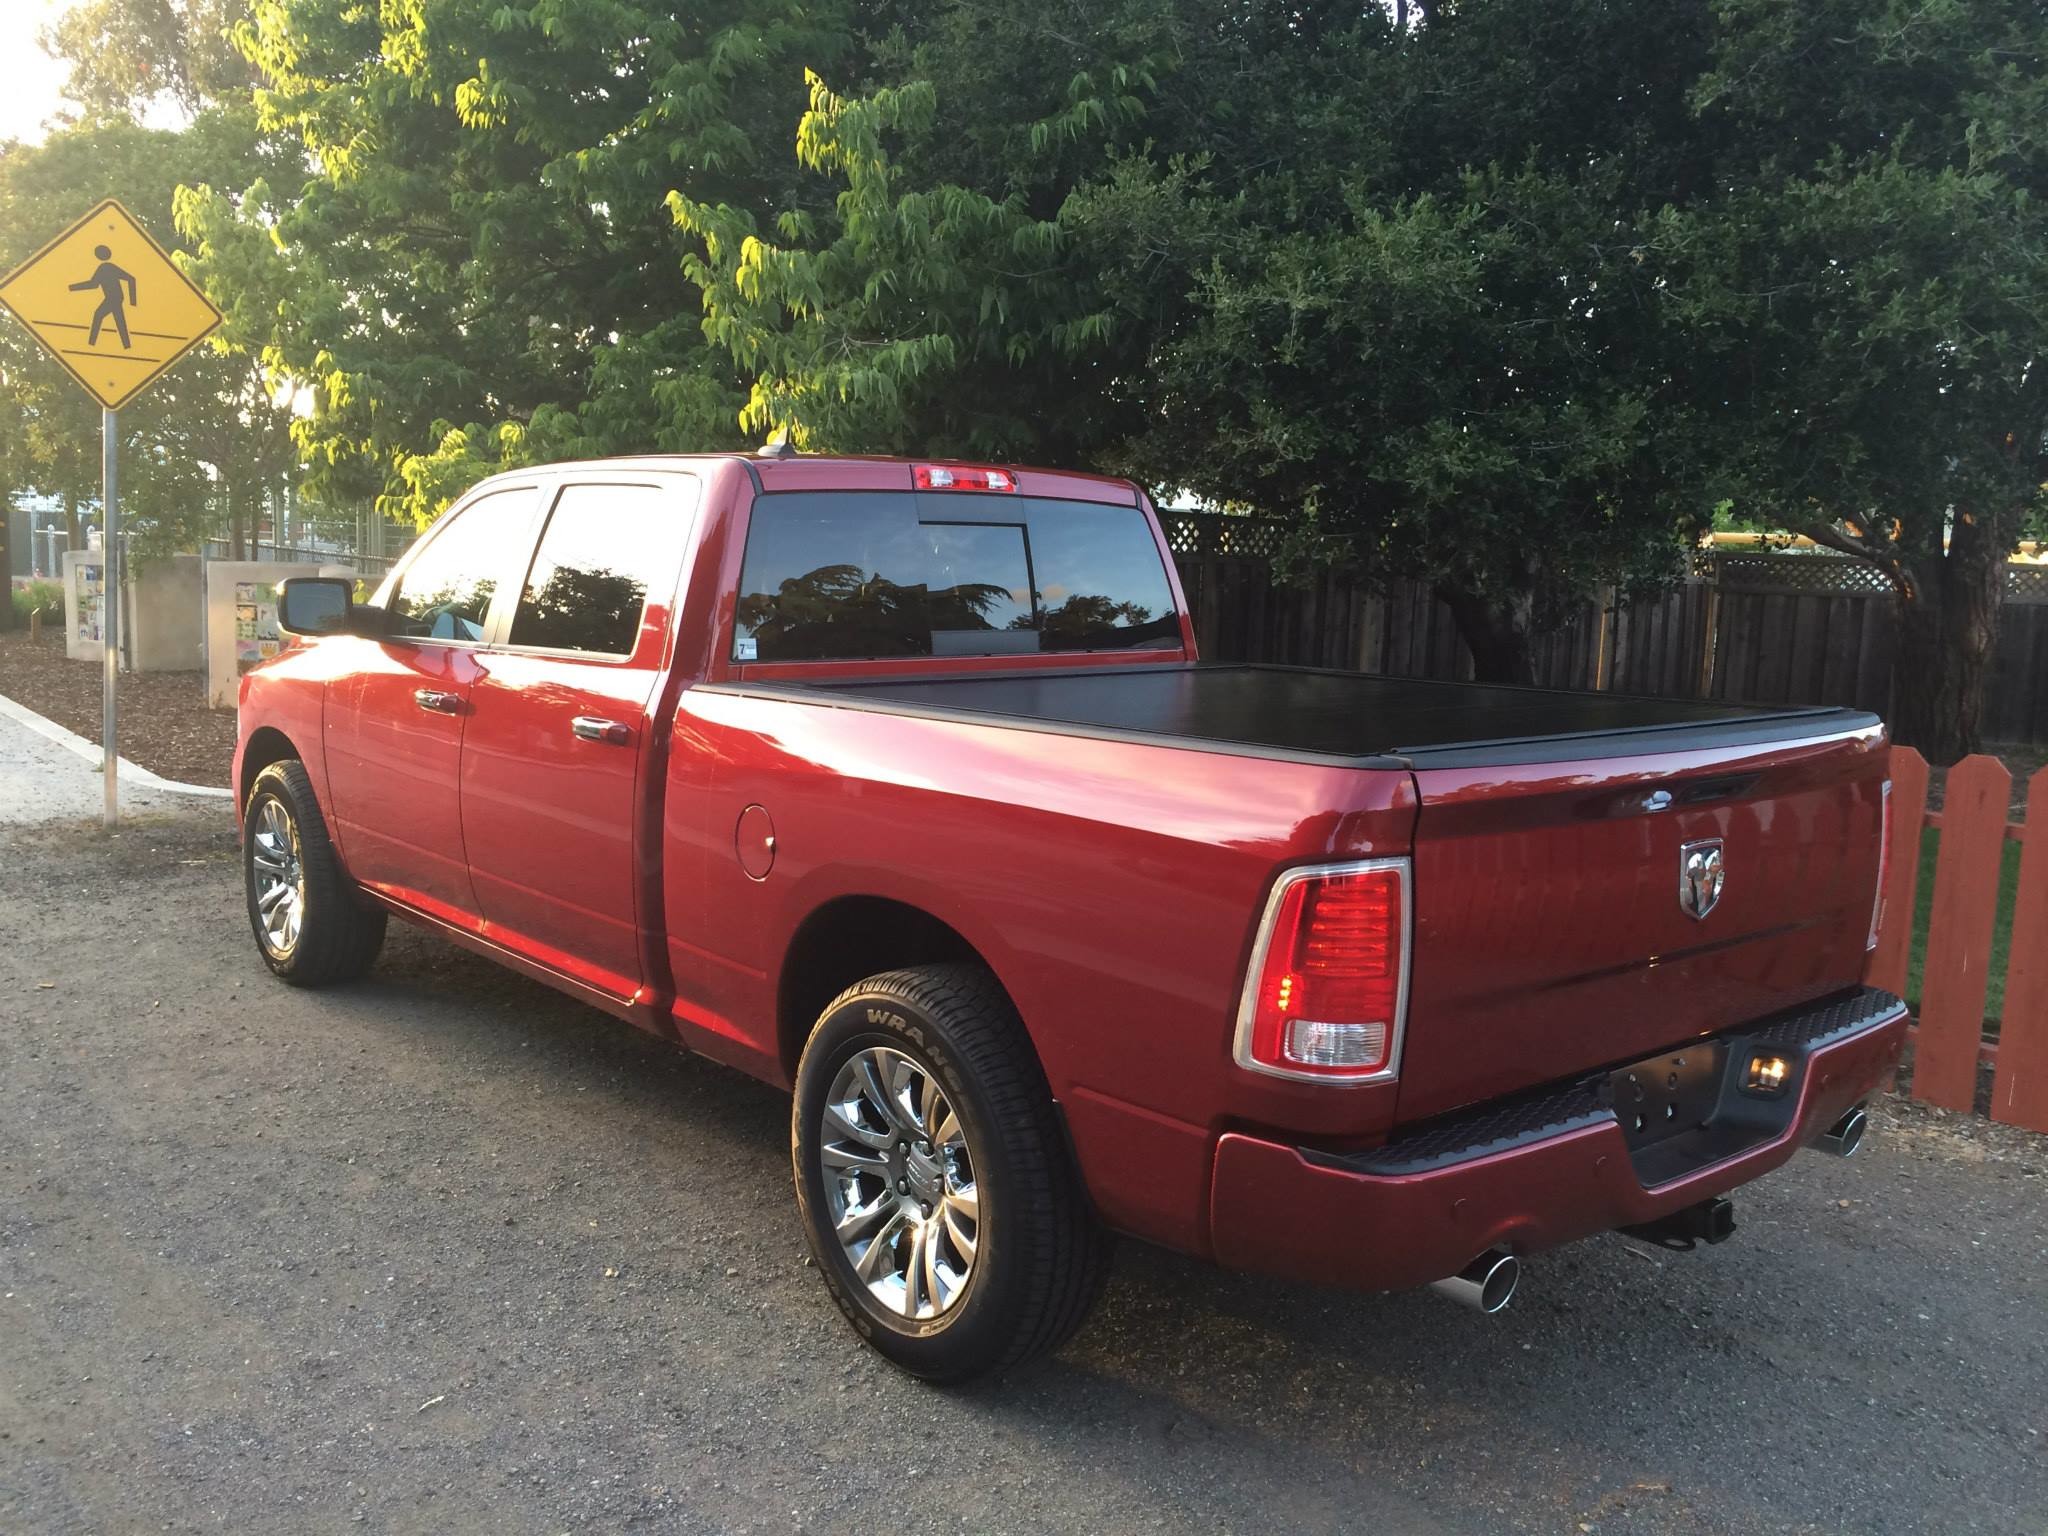 2048x1536 May 2014 Ram 1500 Diesel Truck of the Month Contest-ram.jpg